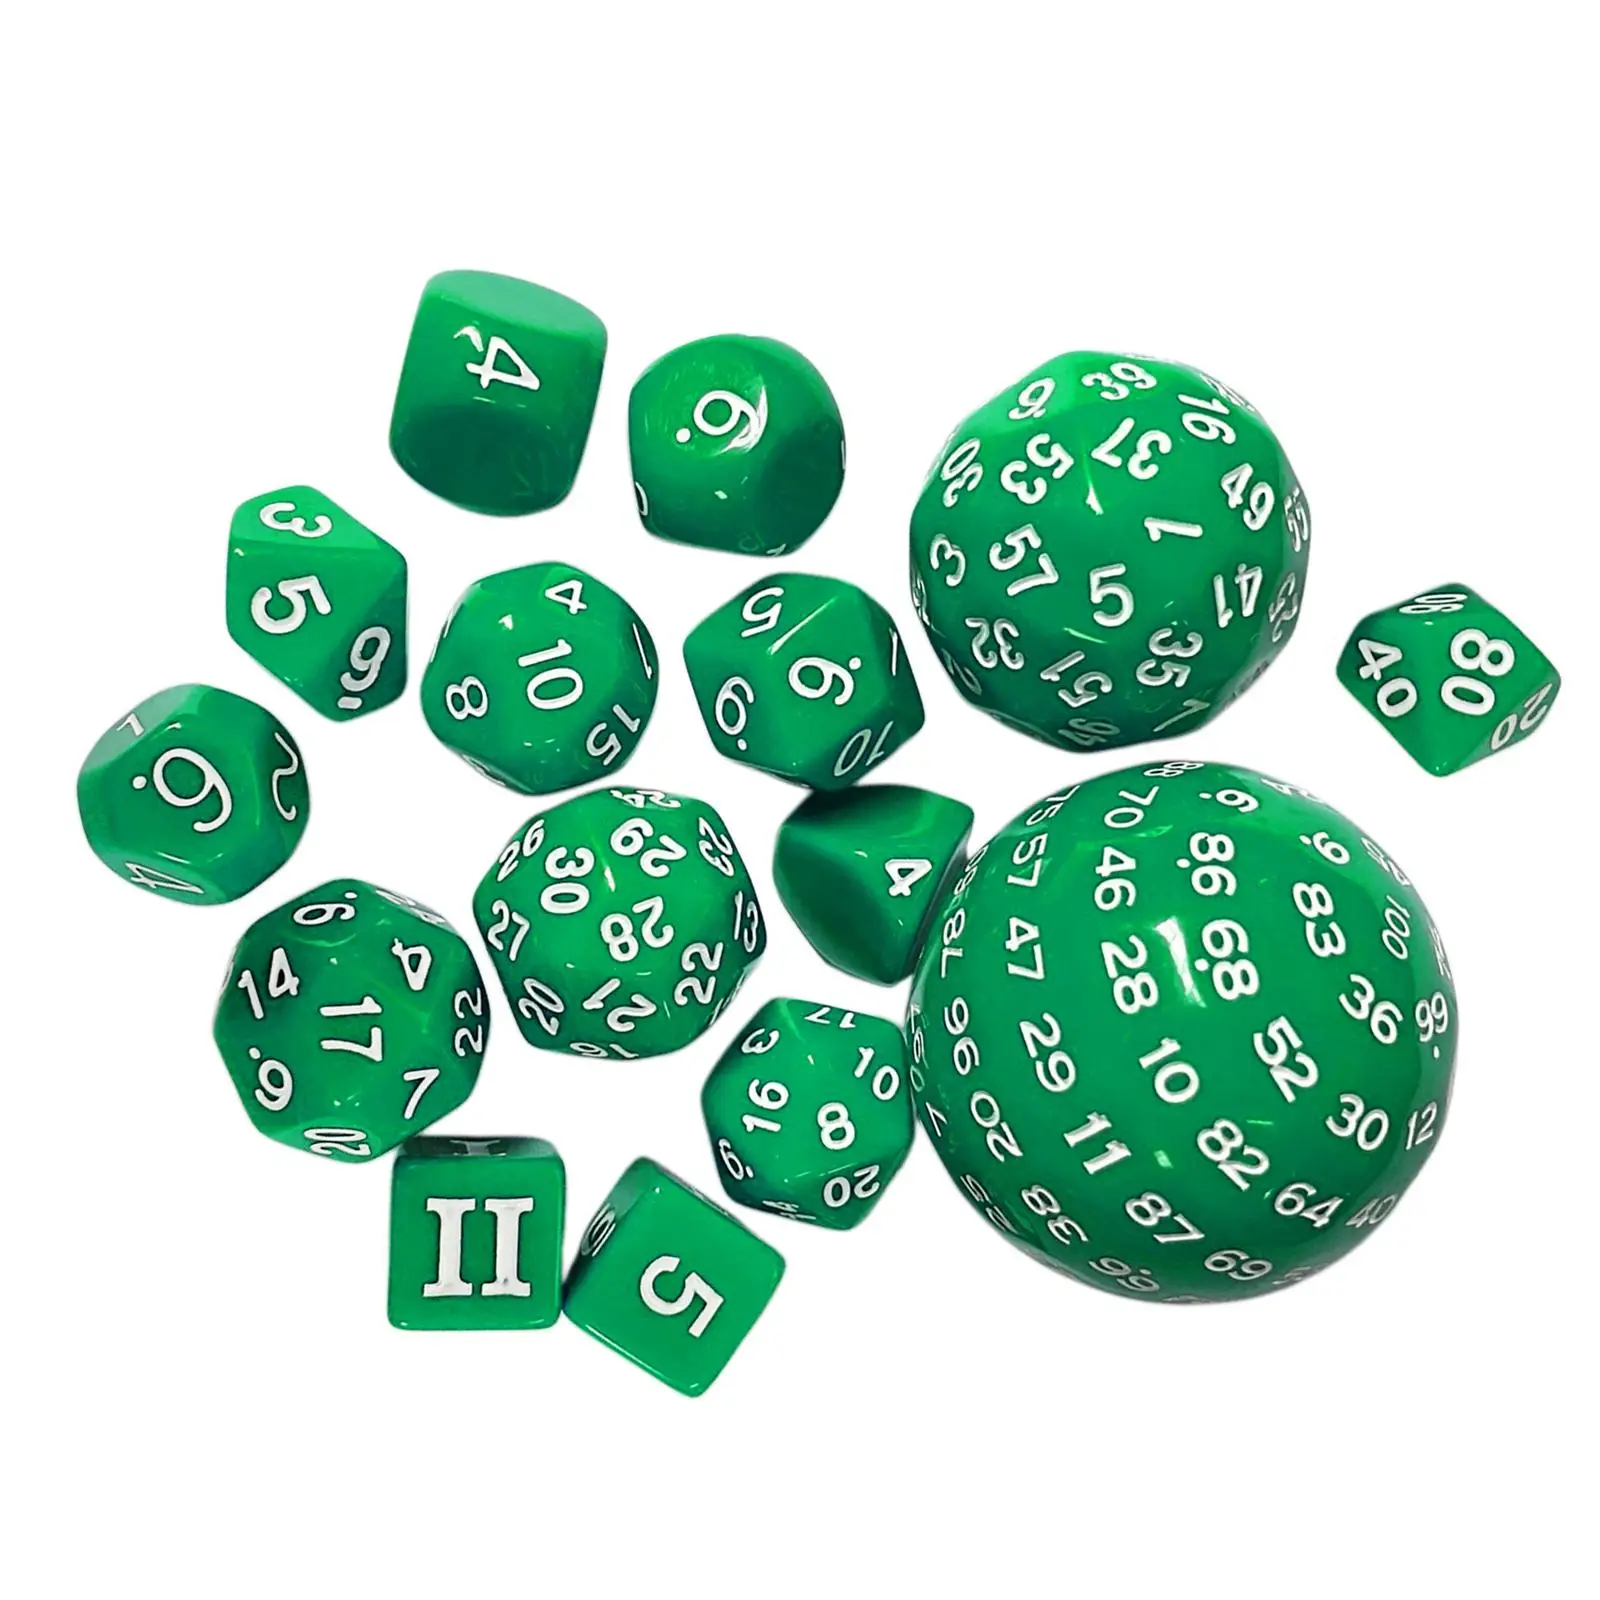 15 Pack Lightwheigt D100 D60 D30 D24 D20 D16 D12 D10 D8 D7 D5 D4 Dice Game Acrylic Multi Sided Game Dice Set for Role Playing